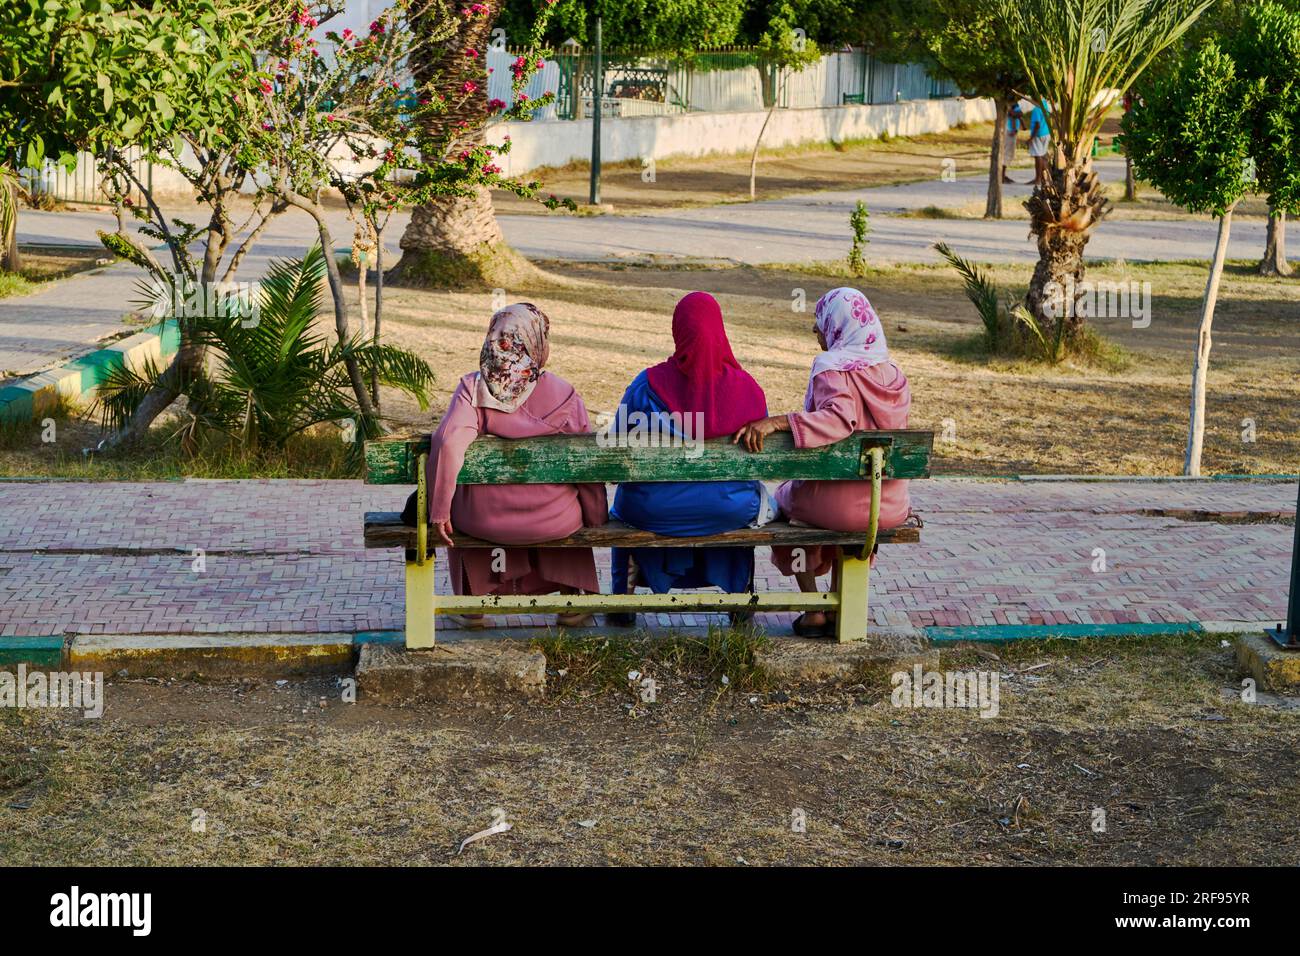 Moroccan women sitting on the bench in the park Stock Photo